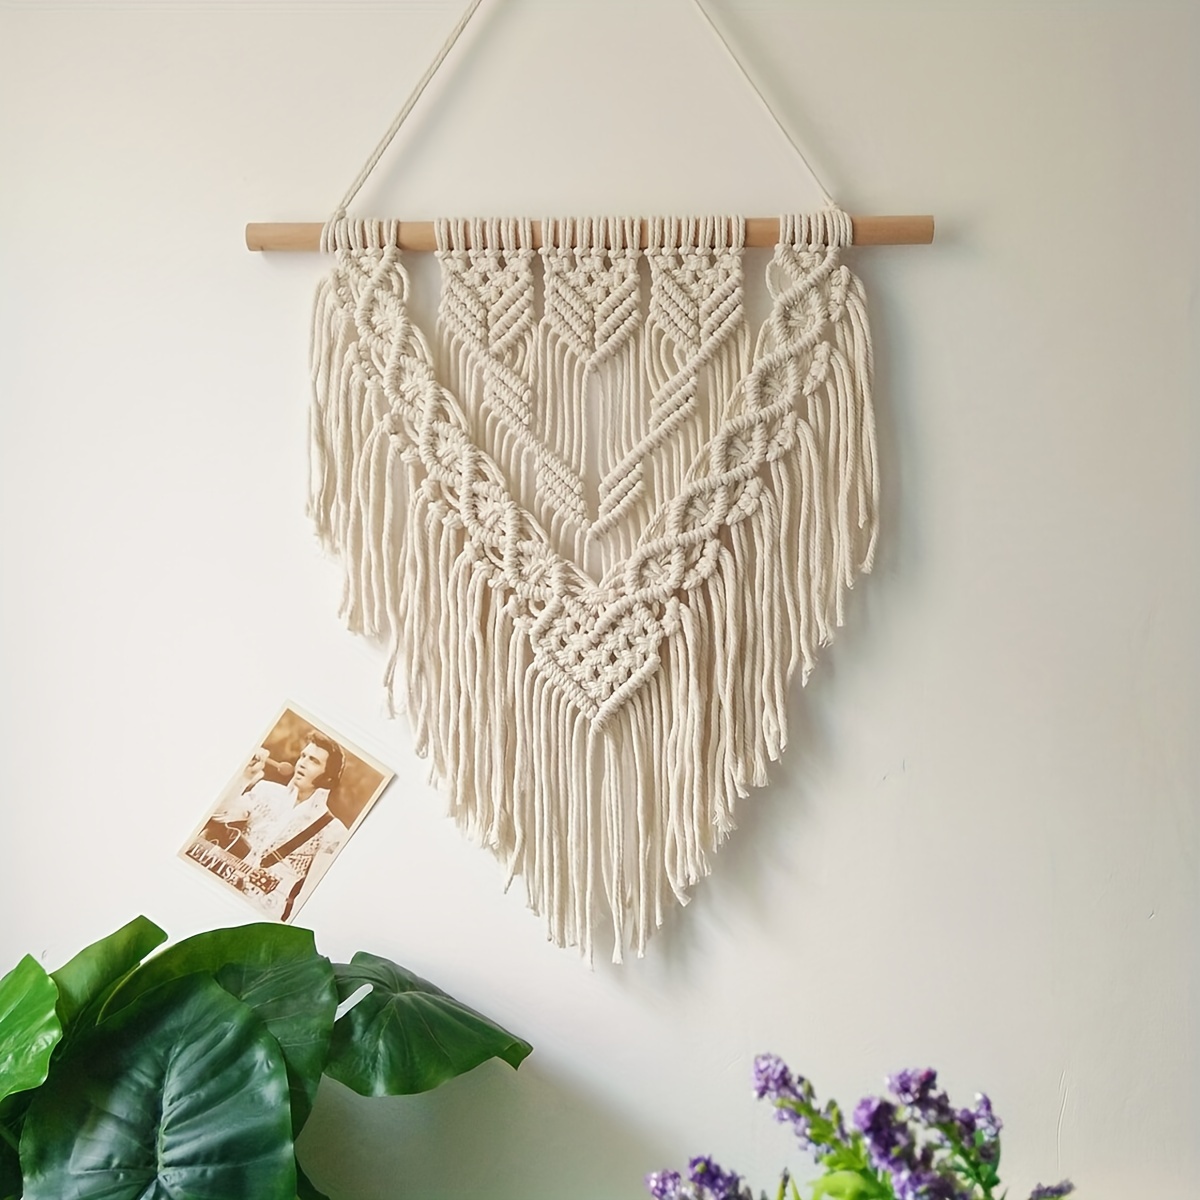 

1pc Nordic Macrame Wall Hanging Tapestry, Indoor Hanging Bohemian Wall Decor For Living Room, Kitchen, Bedroom Or Apartment Home Decor